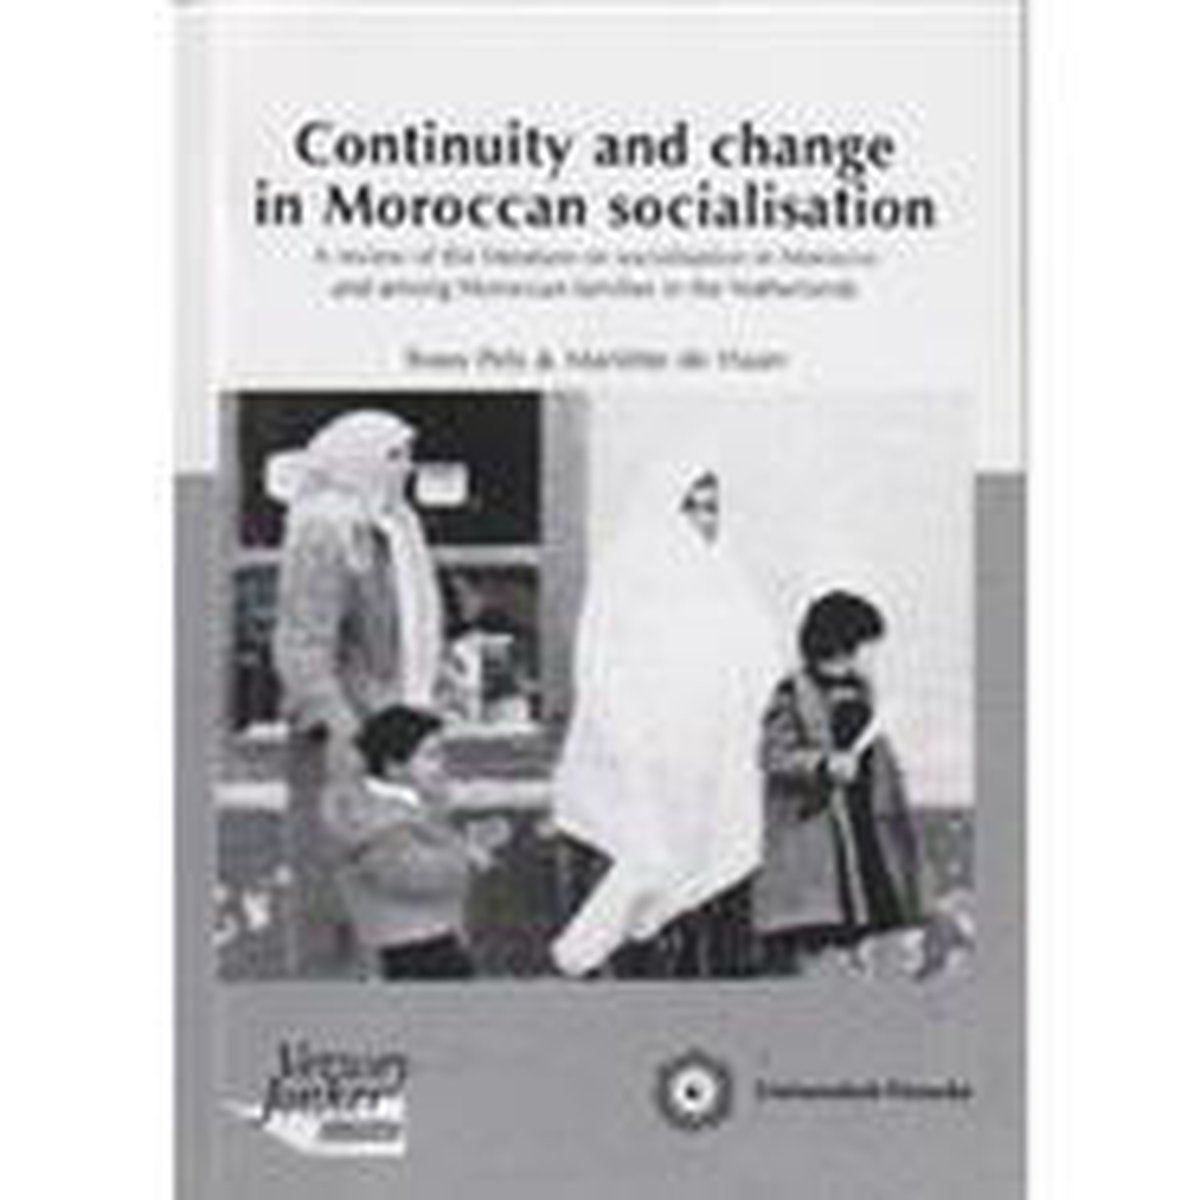 Continuity and change in Moroccan socialization